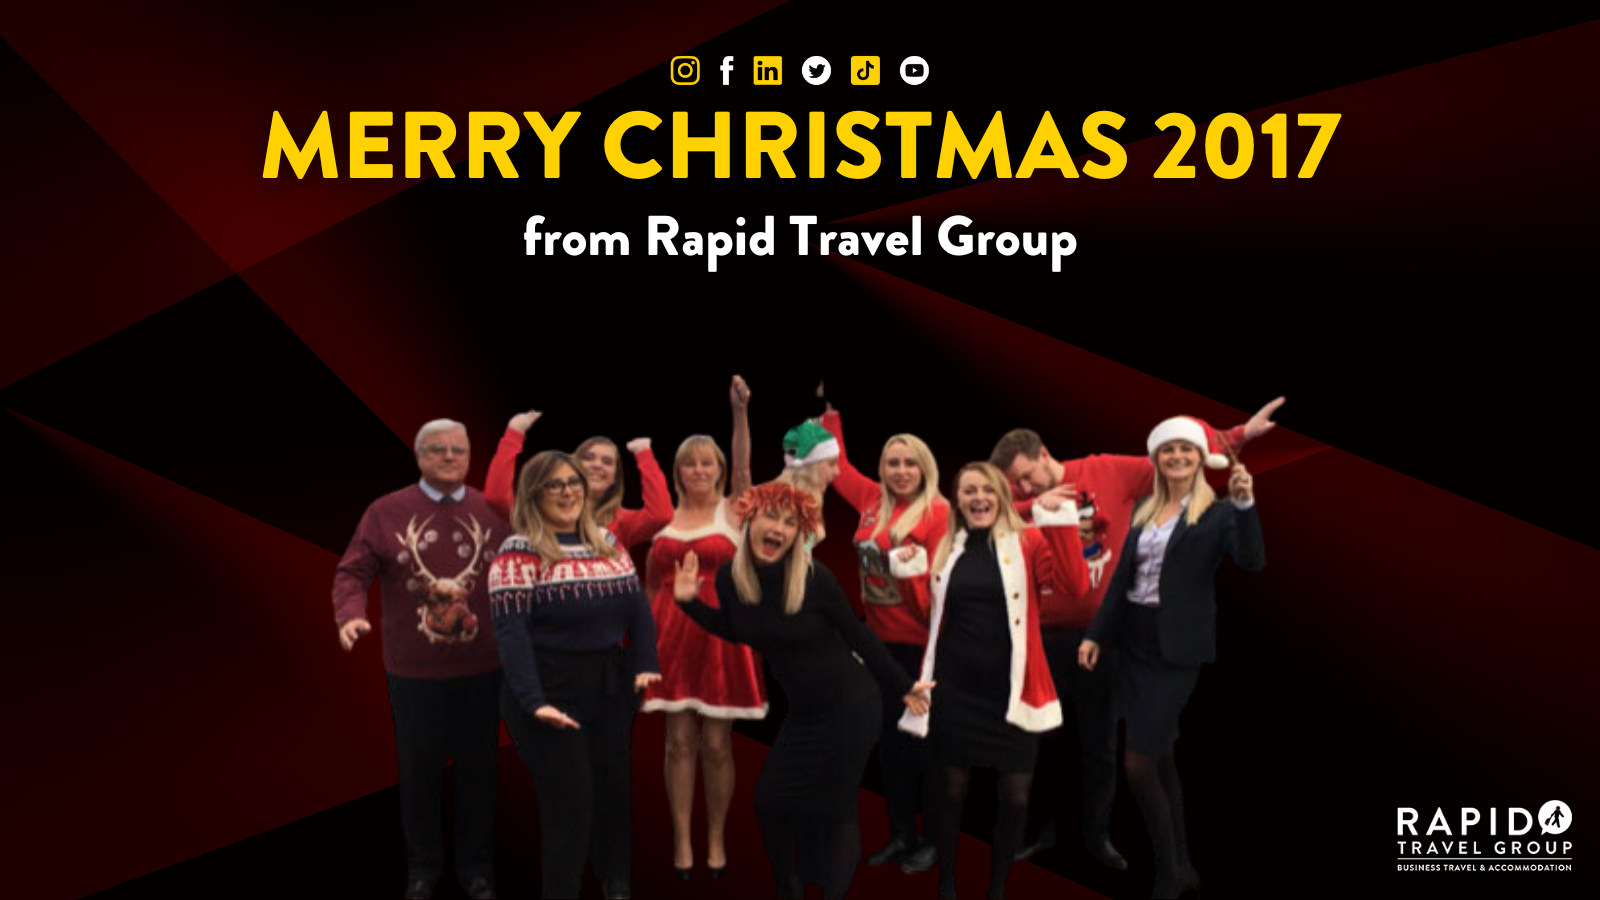 Merry Christmas 2017 from Rapid Travel Group . Photo shows the team dressed in Christmas outfits.